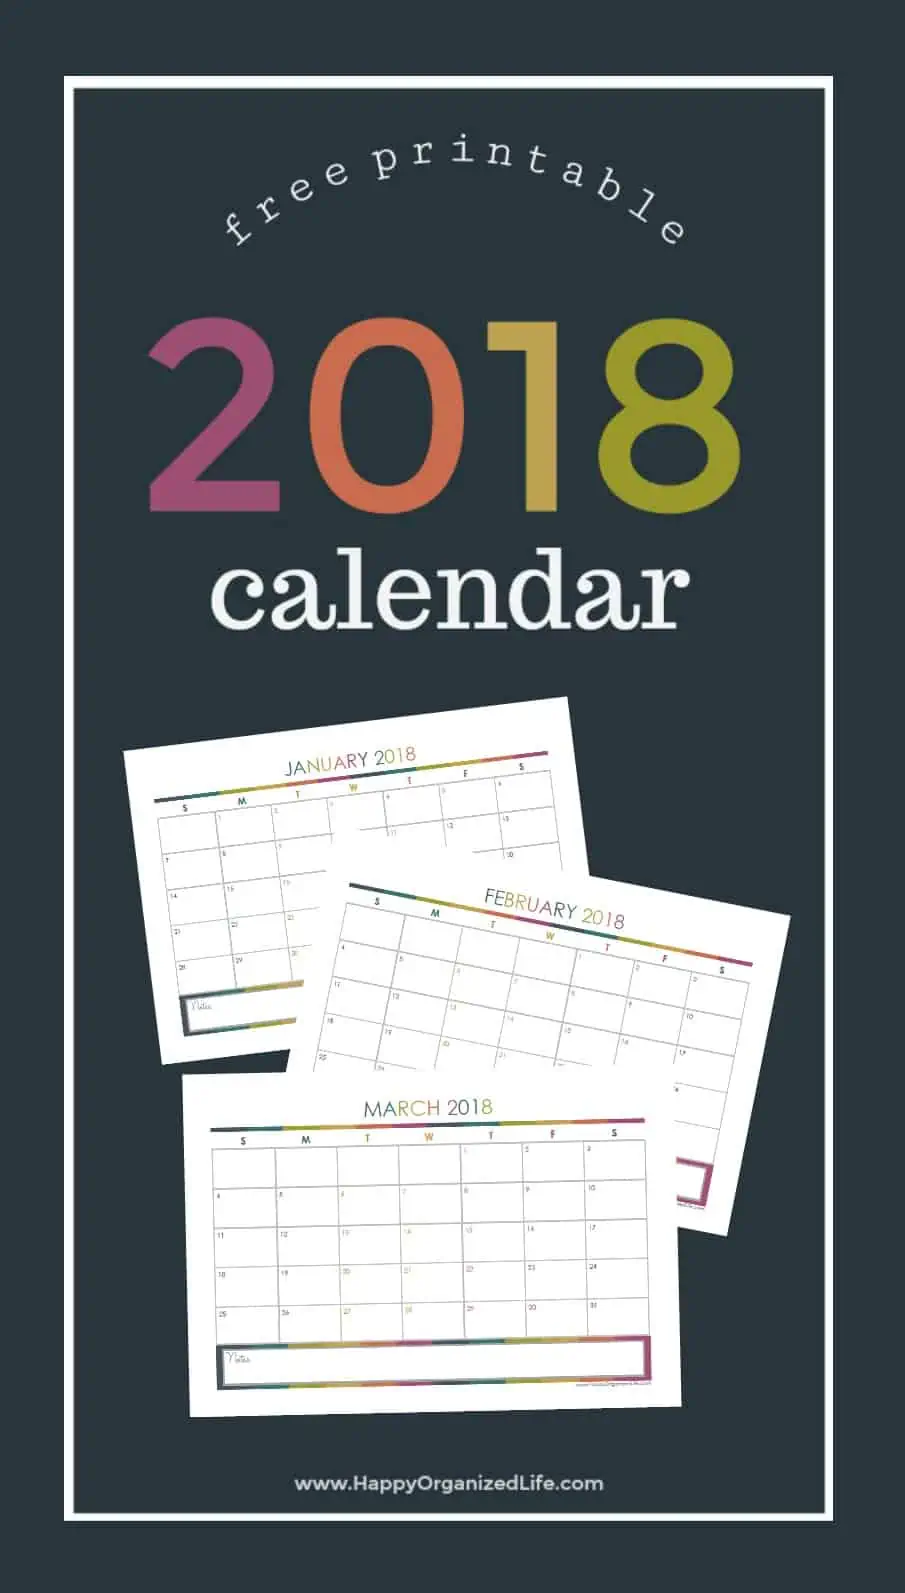 Grab your free printable monthly calendar for October 2017- December 2018 so you can have your most organized year yet!! Home Organization- Home Binder and Planner Tour, organization, organizational printables, organized, productivity, planning, productive, pretty printables, organize your life, organized life, home management binder, how to get organized